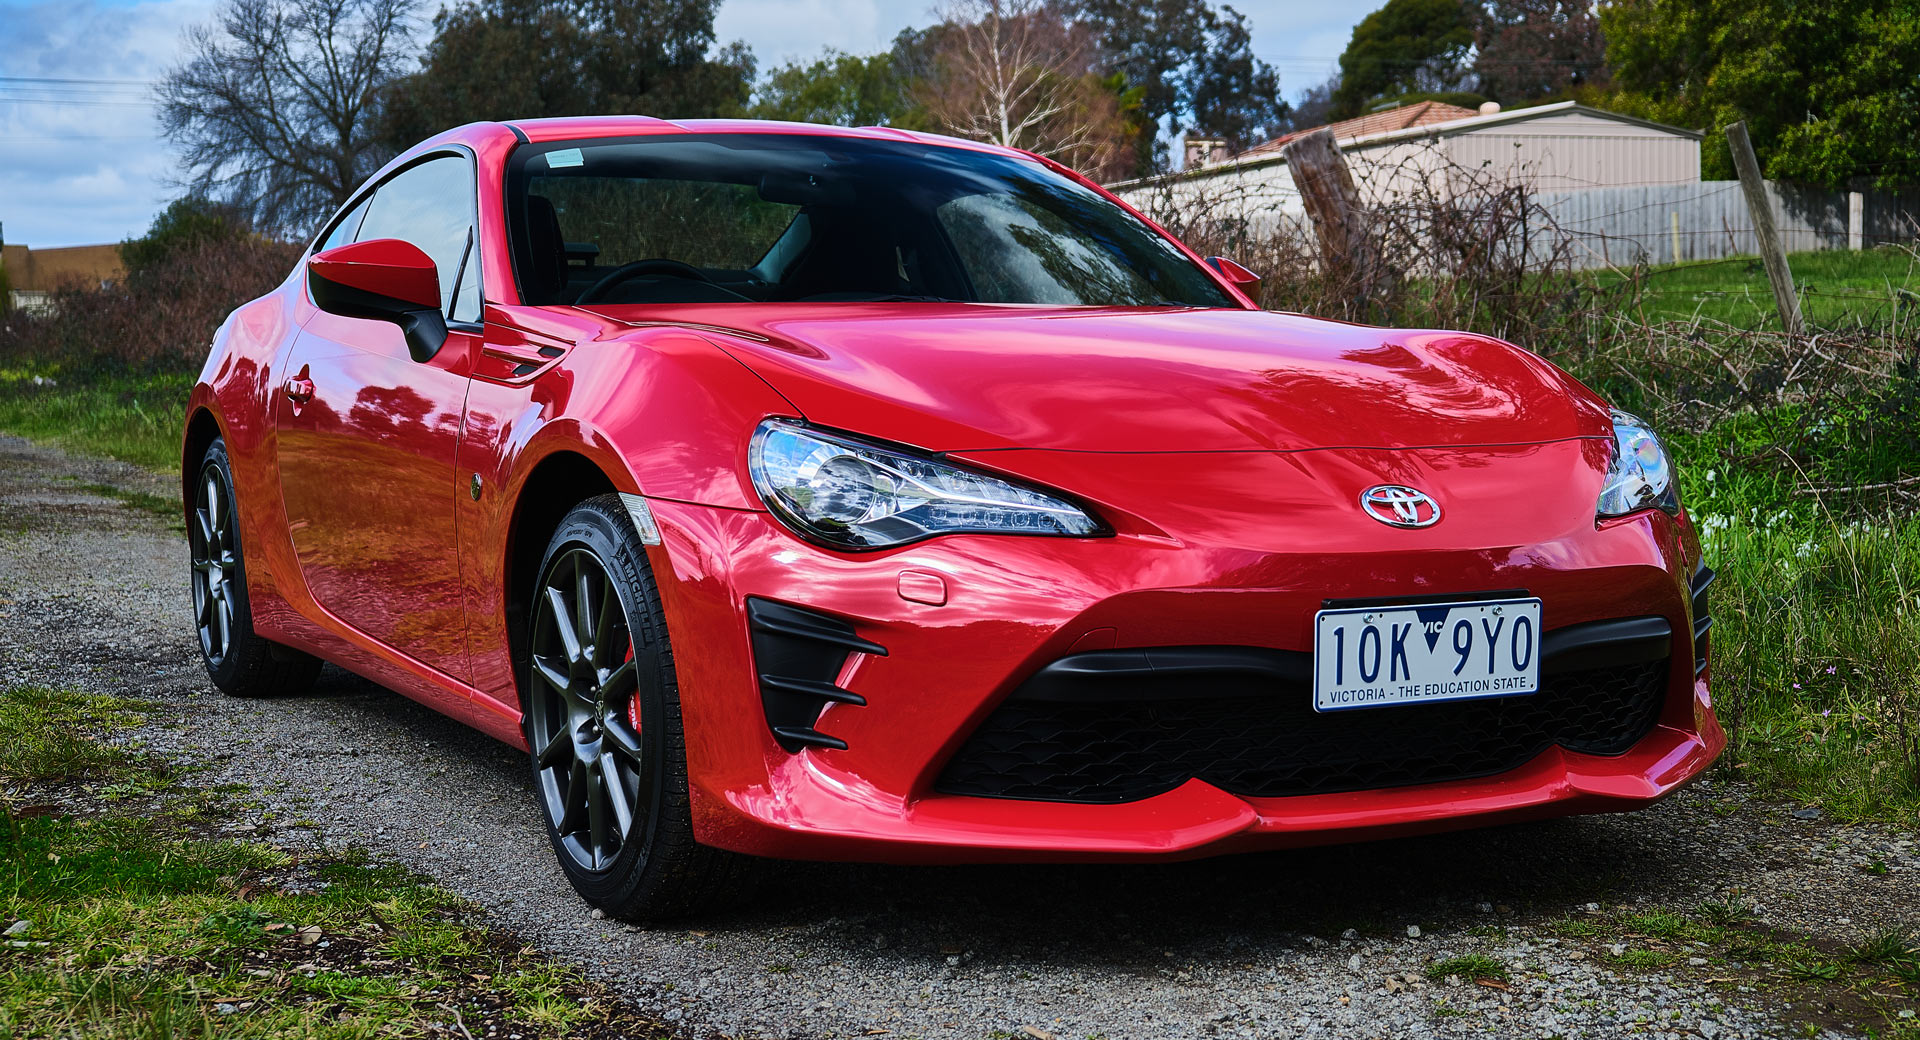 driven-2019-toyota-86-gt-remains-a-compelling-driver-s-car-carscoops